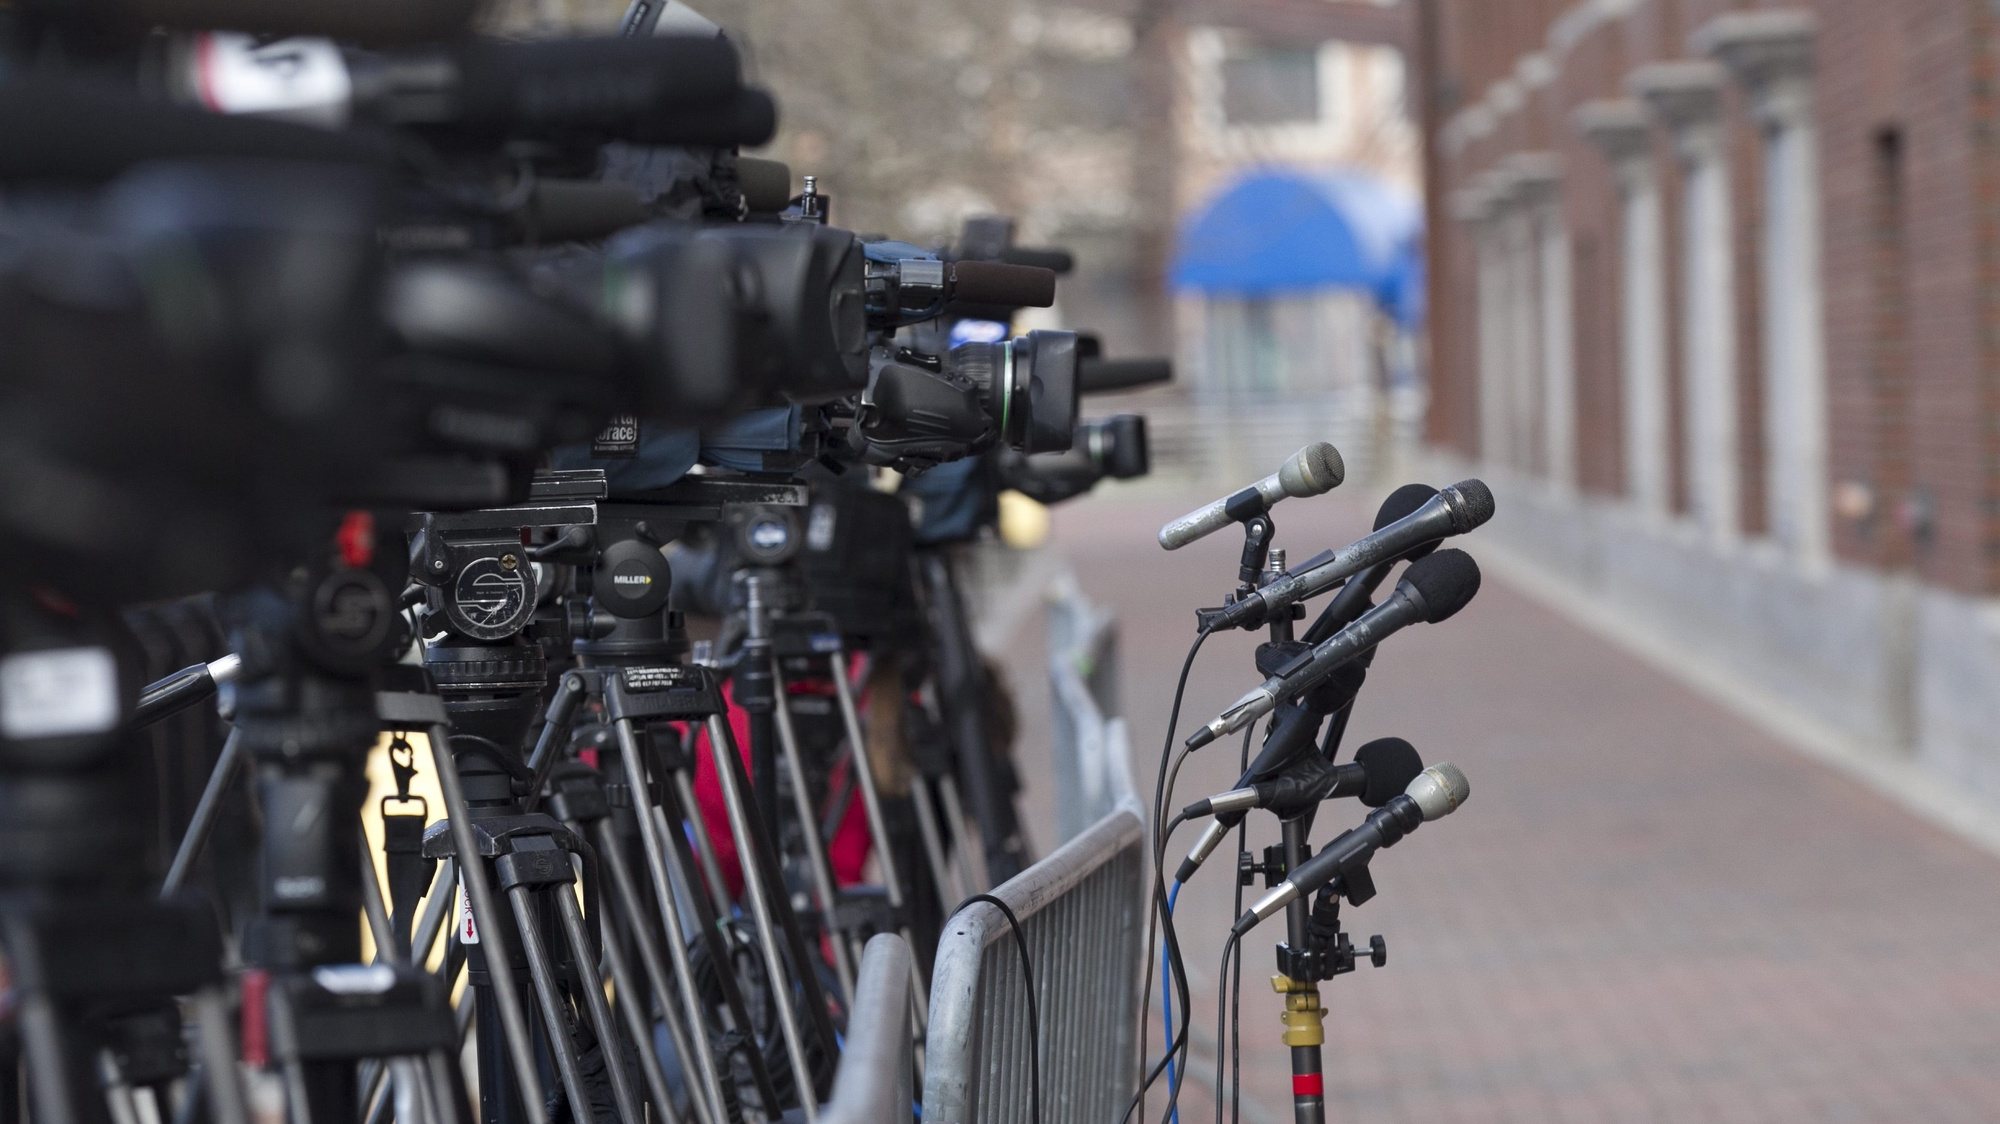 epa04695649 Media cameras and microphones outside the John J Moakley Federal Courthouse during the verdict deliberation of Tsarnaev&#039;s trial in Boston, Massachusetts, USA, 08 April 2015. Verdict deliberation in the Federal trial of Dzhokhar Tsarnaev continues today.  EPA/KATHERINE TAYLOR